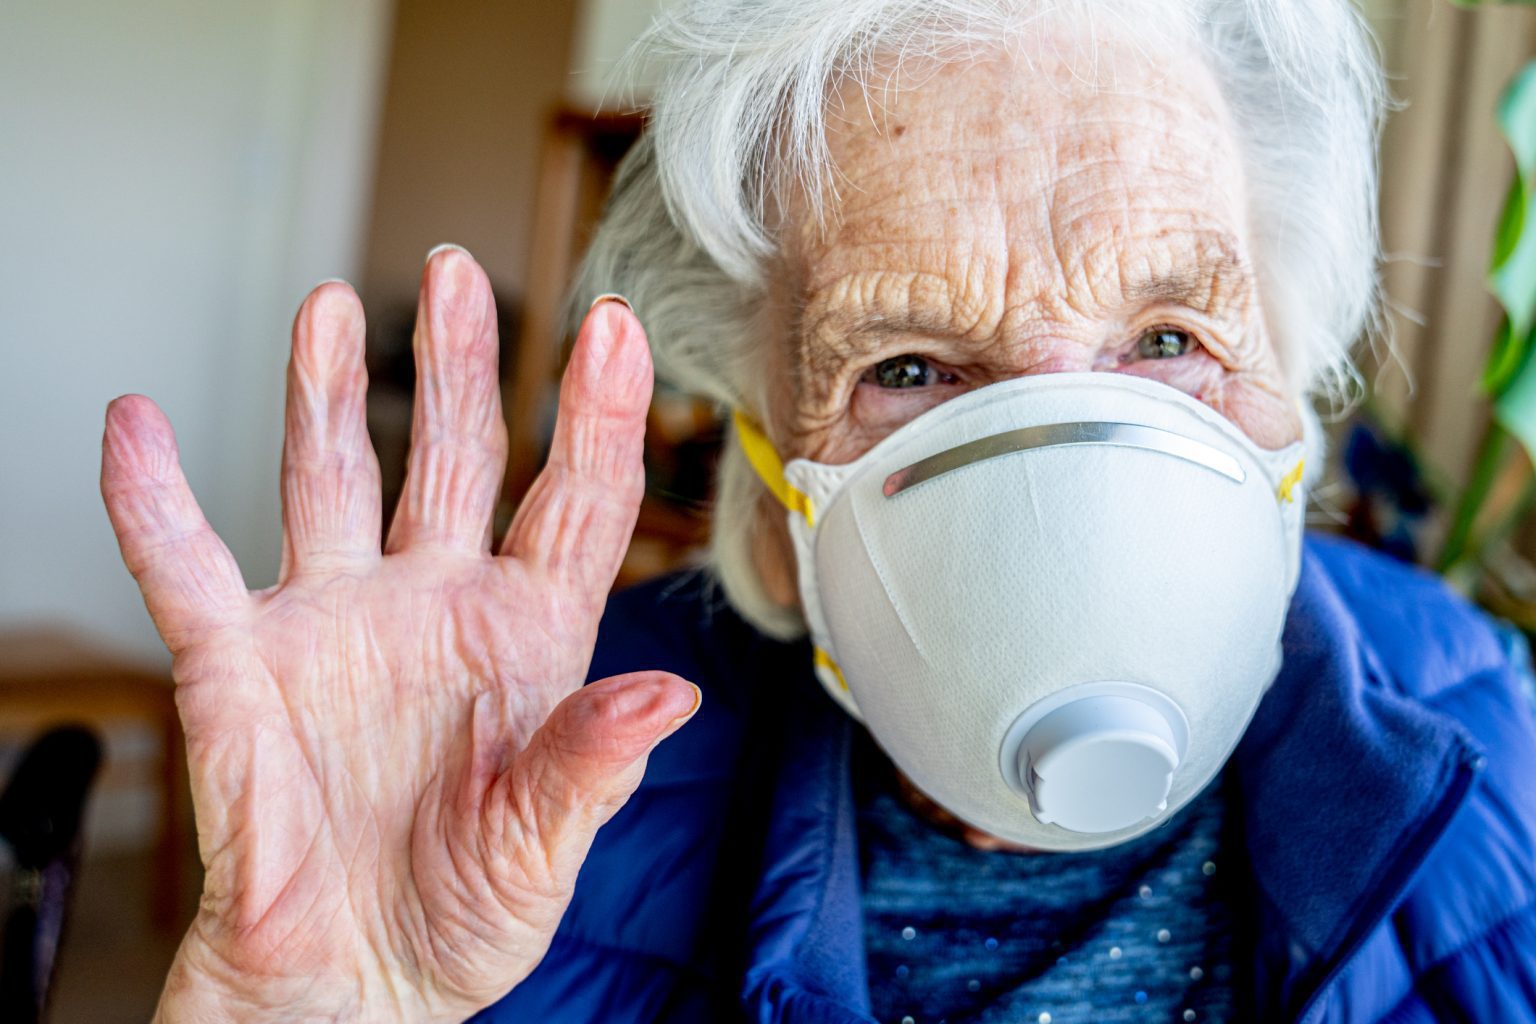 Close-Up Shot of Elderly Senior Caucasian Woman Smiling Holding Her Hands Up Waving Hello or Goodbye Wearing an n95 Protective Face Mask To Prevent the Spread of COVID SARS nCoV 19 Coronavirus Swine Flu H7N9 Influenza Illness During Cold and Flu Season